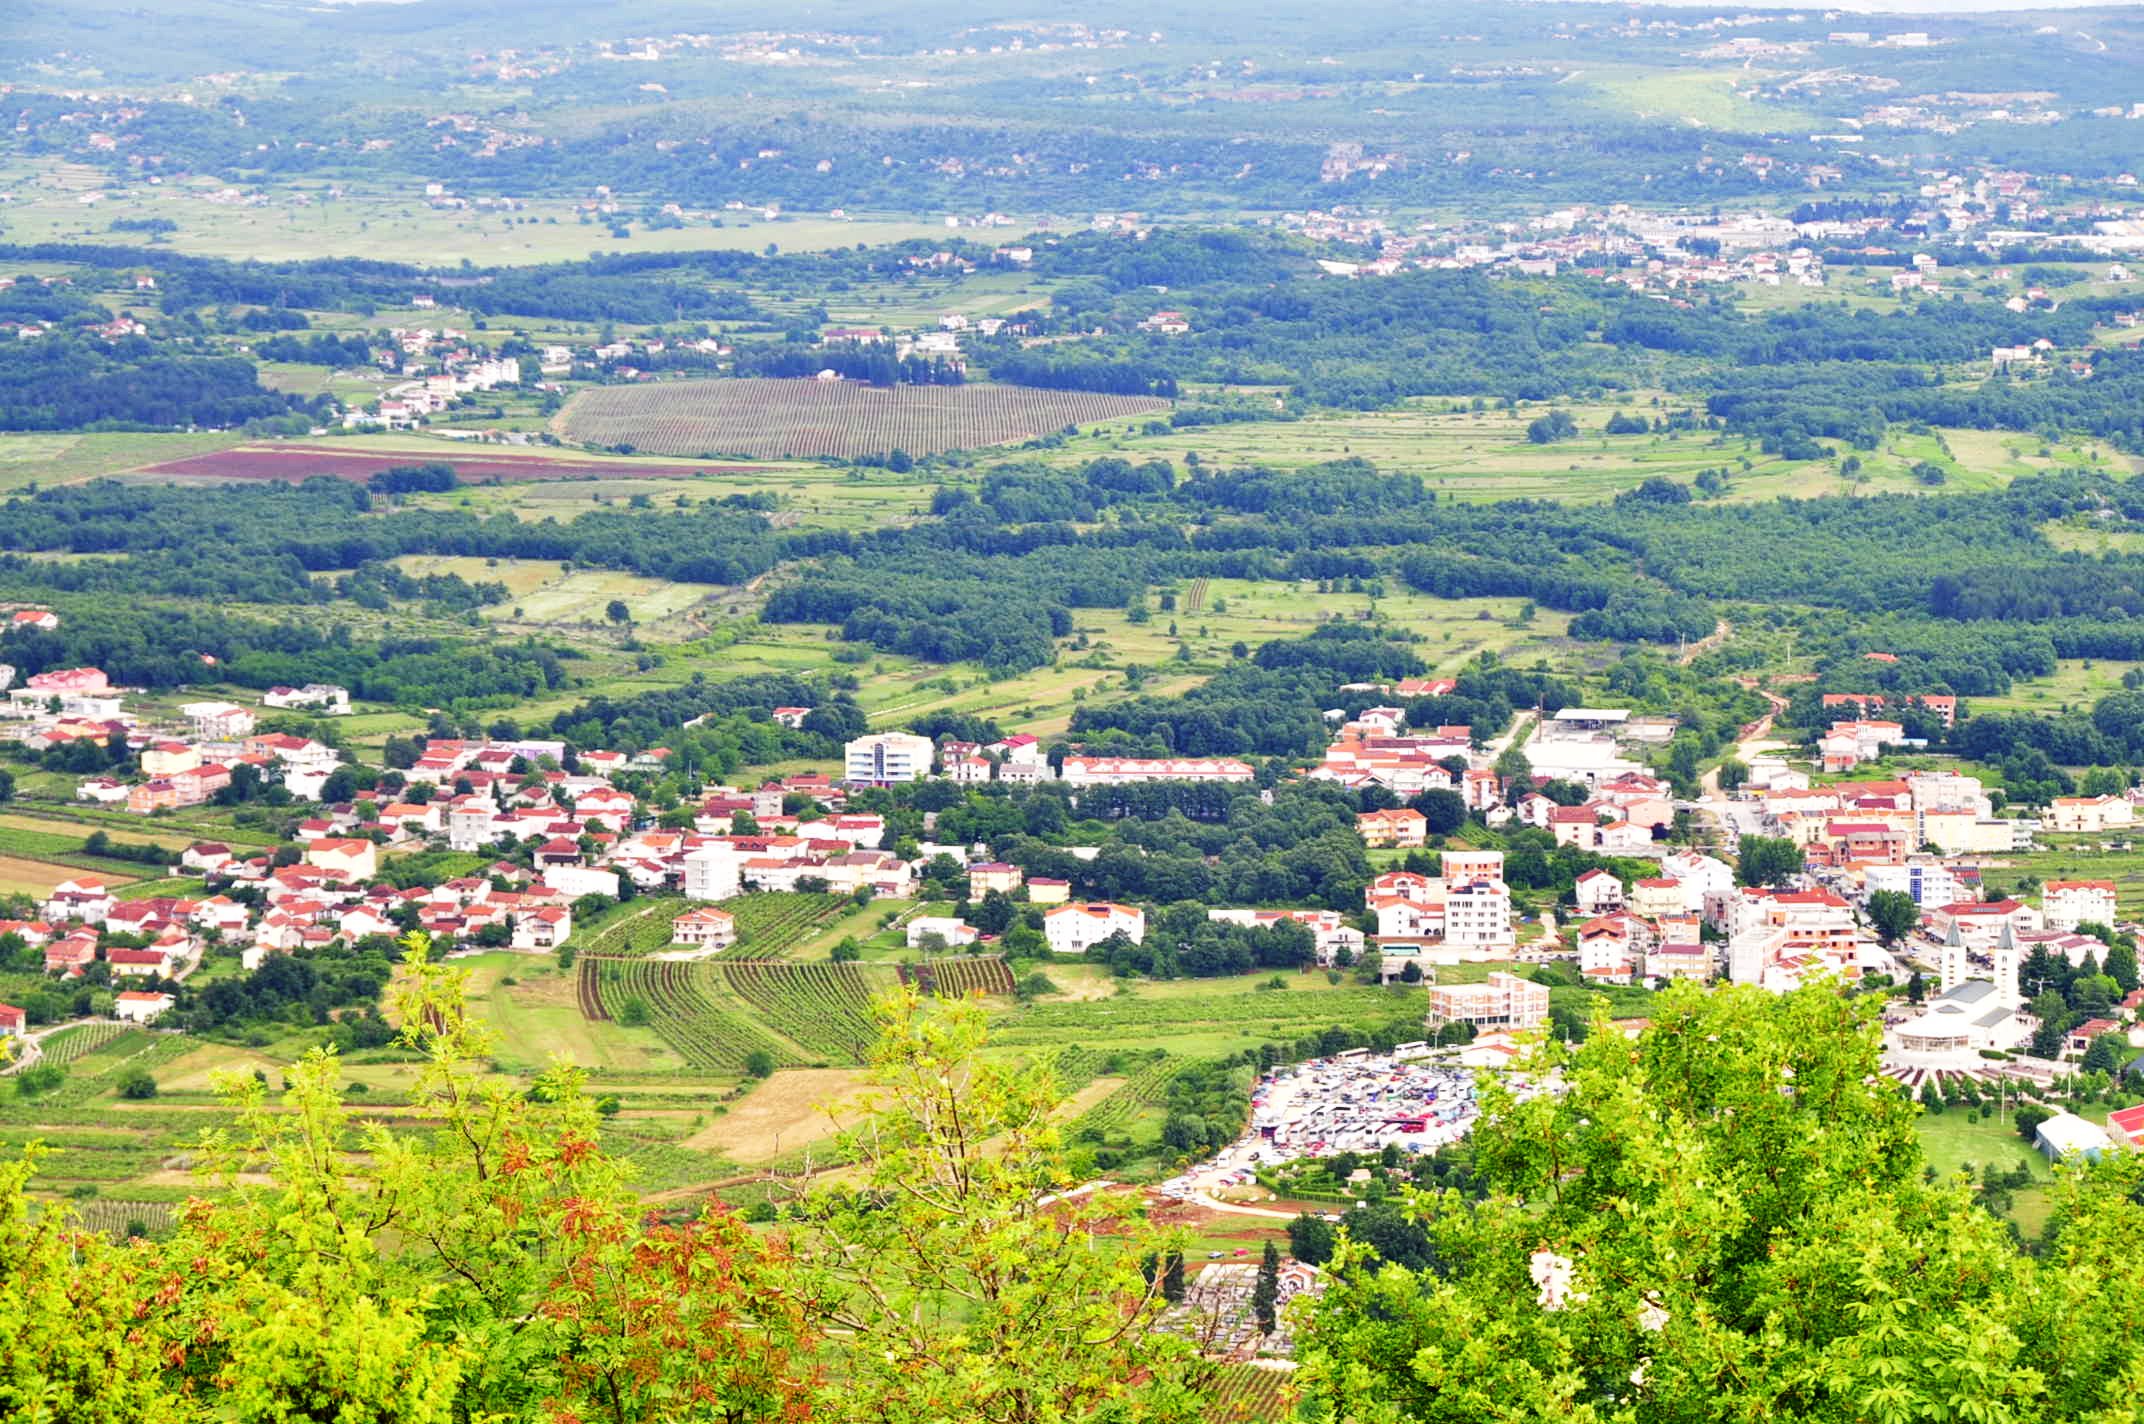 the view from the top of a hill shows a village surrounded by forest